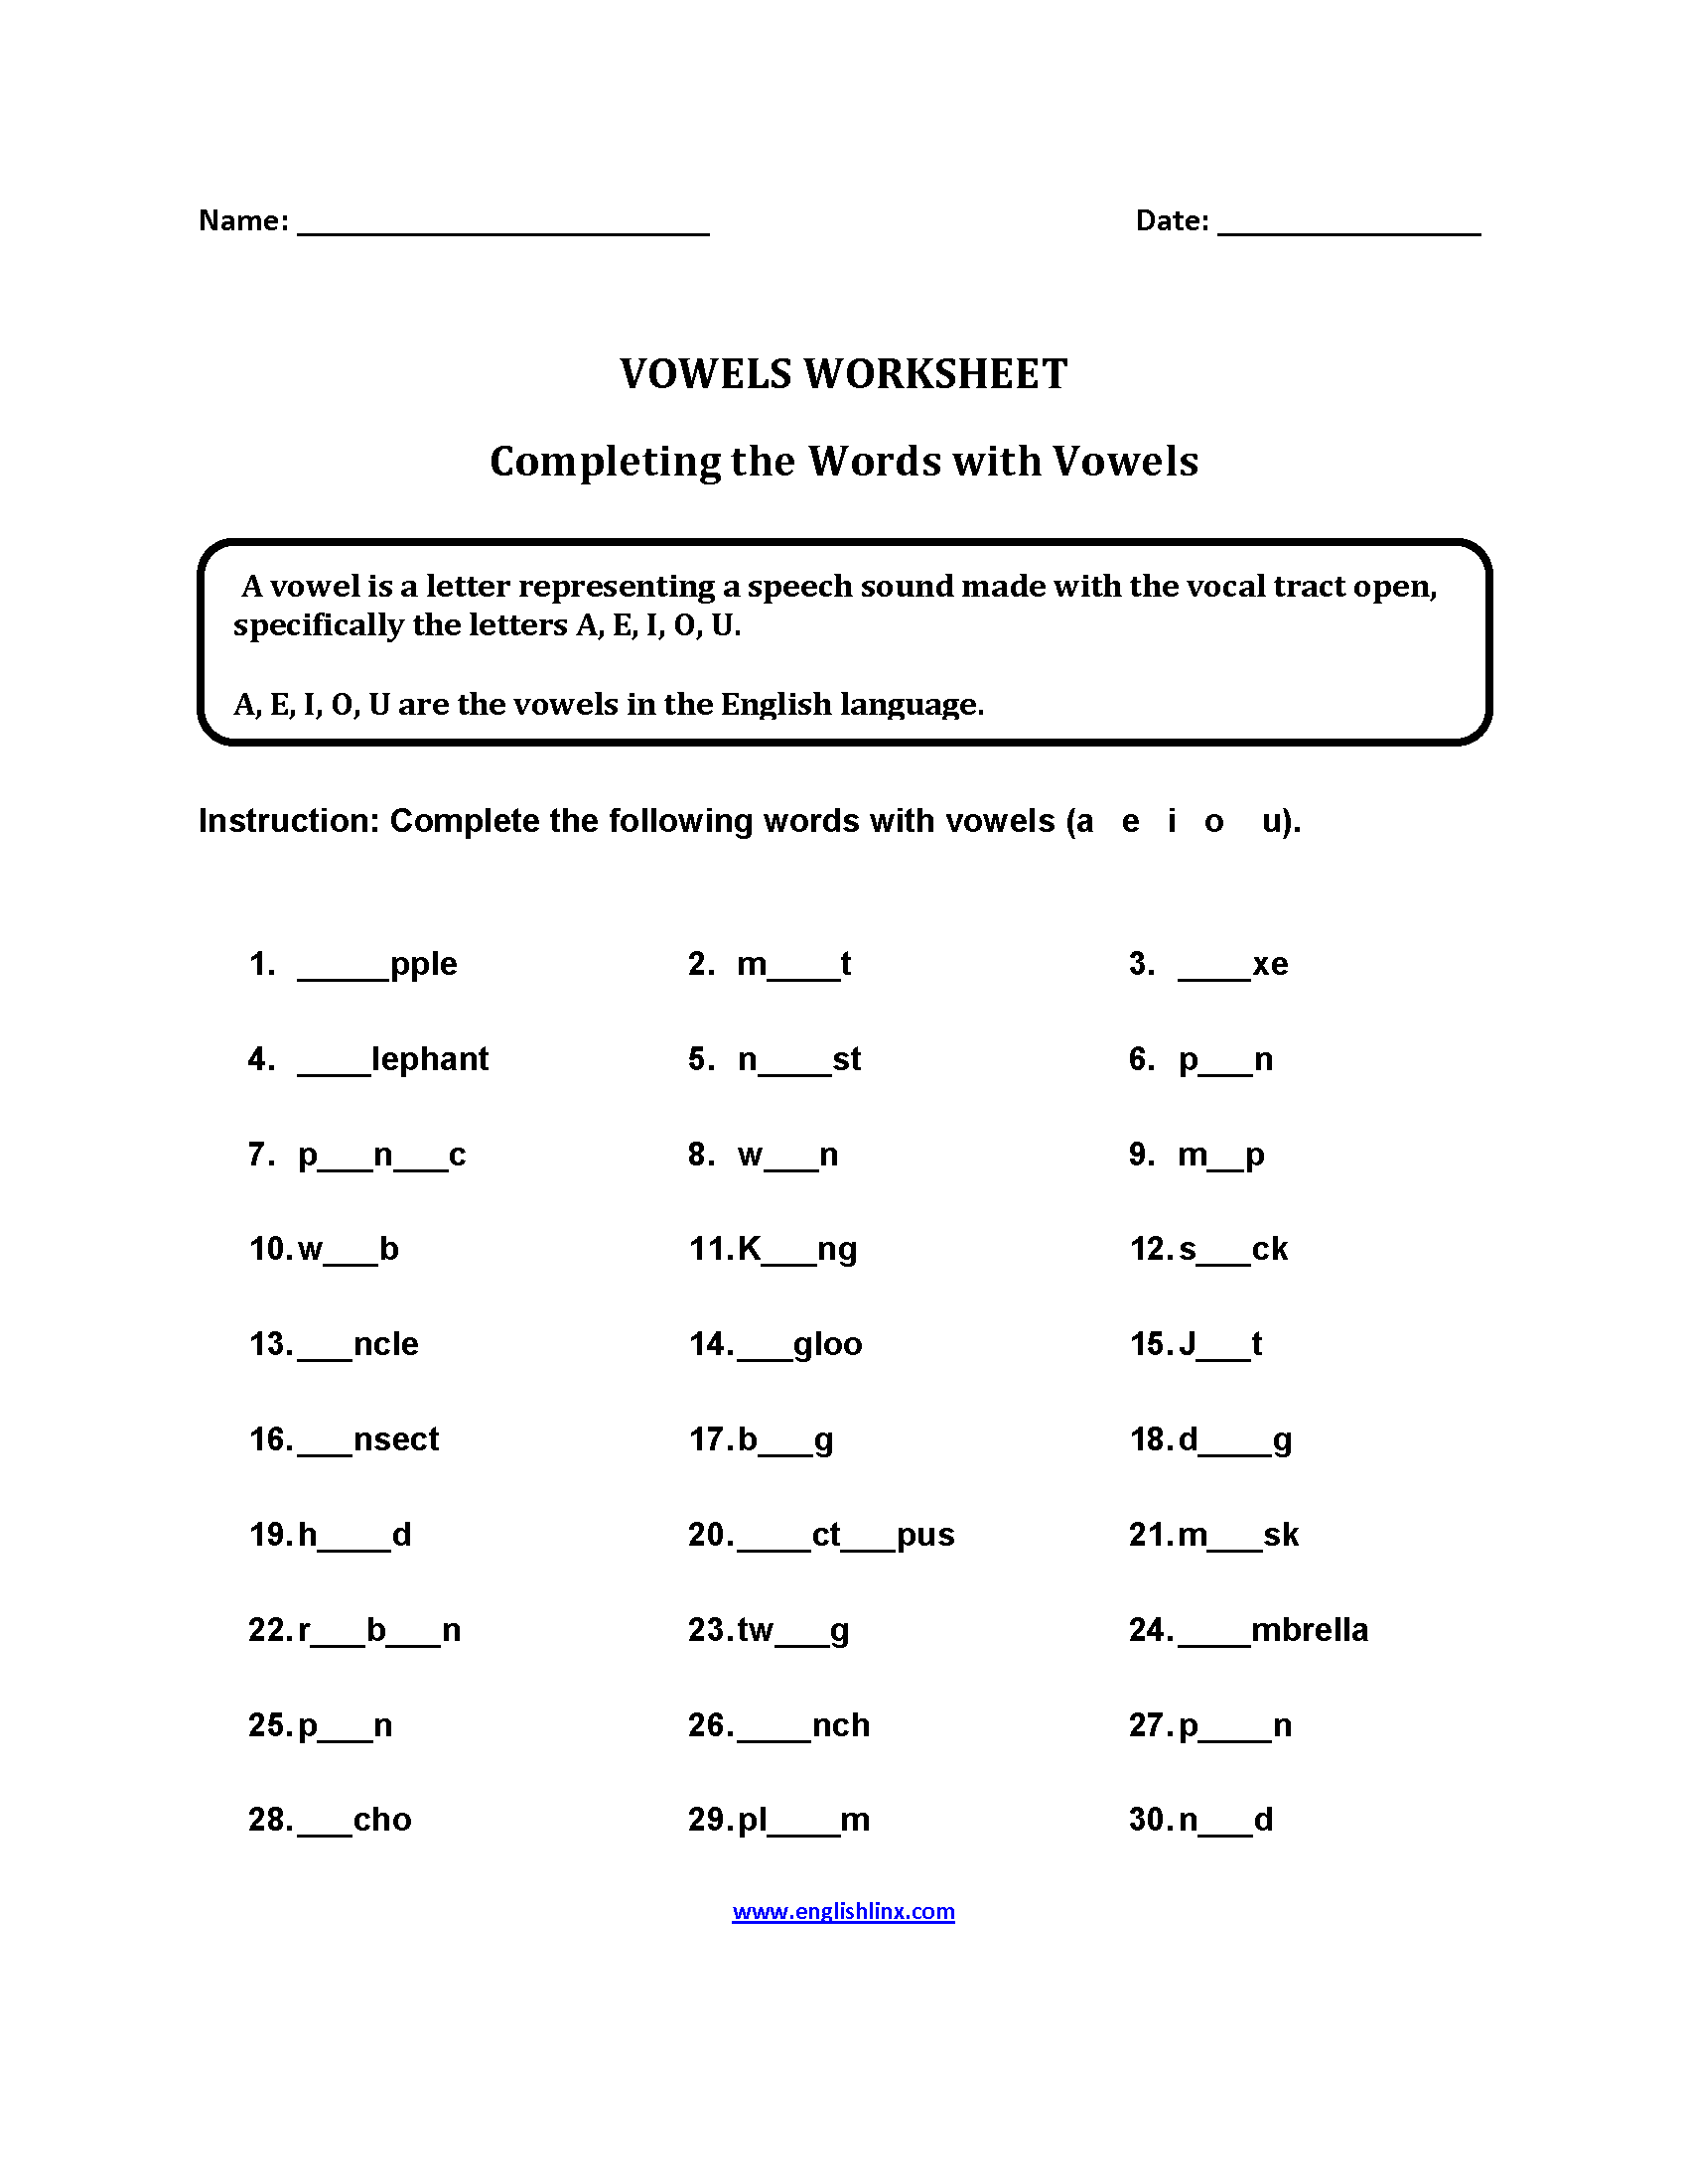 Vowels In English Worksheets